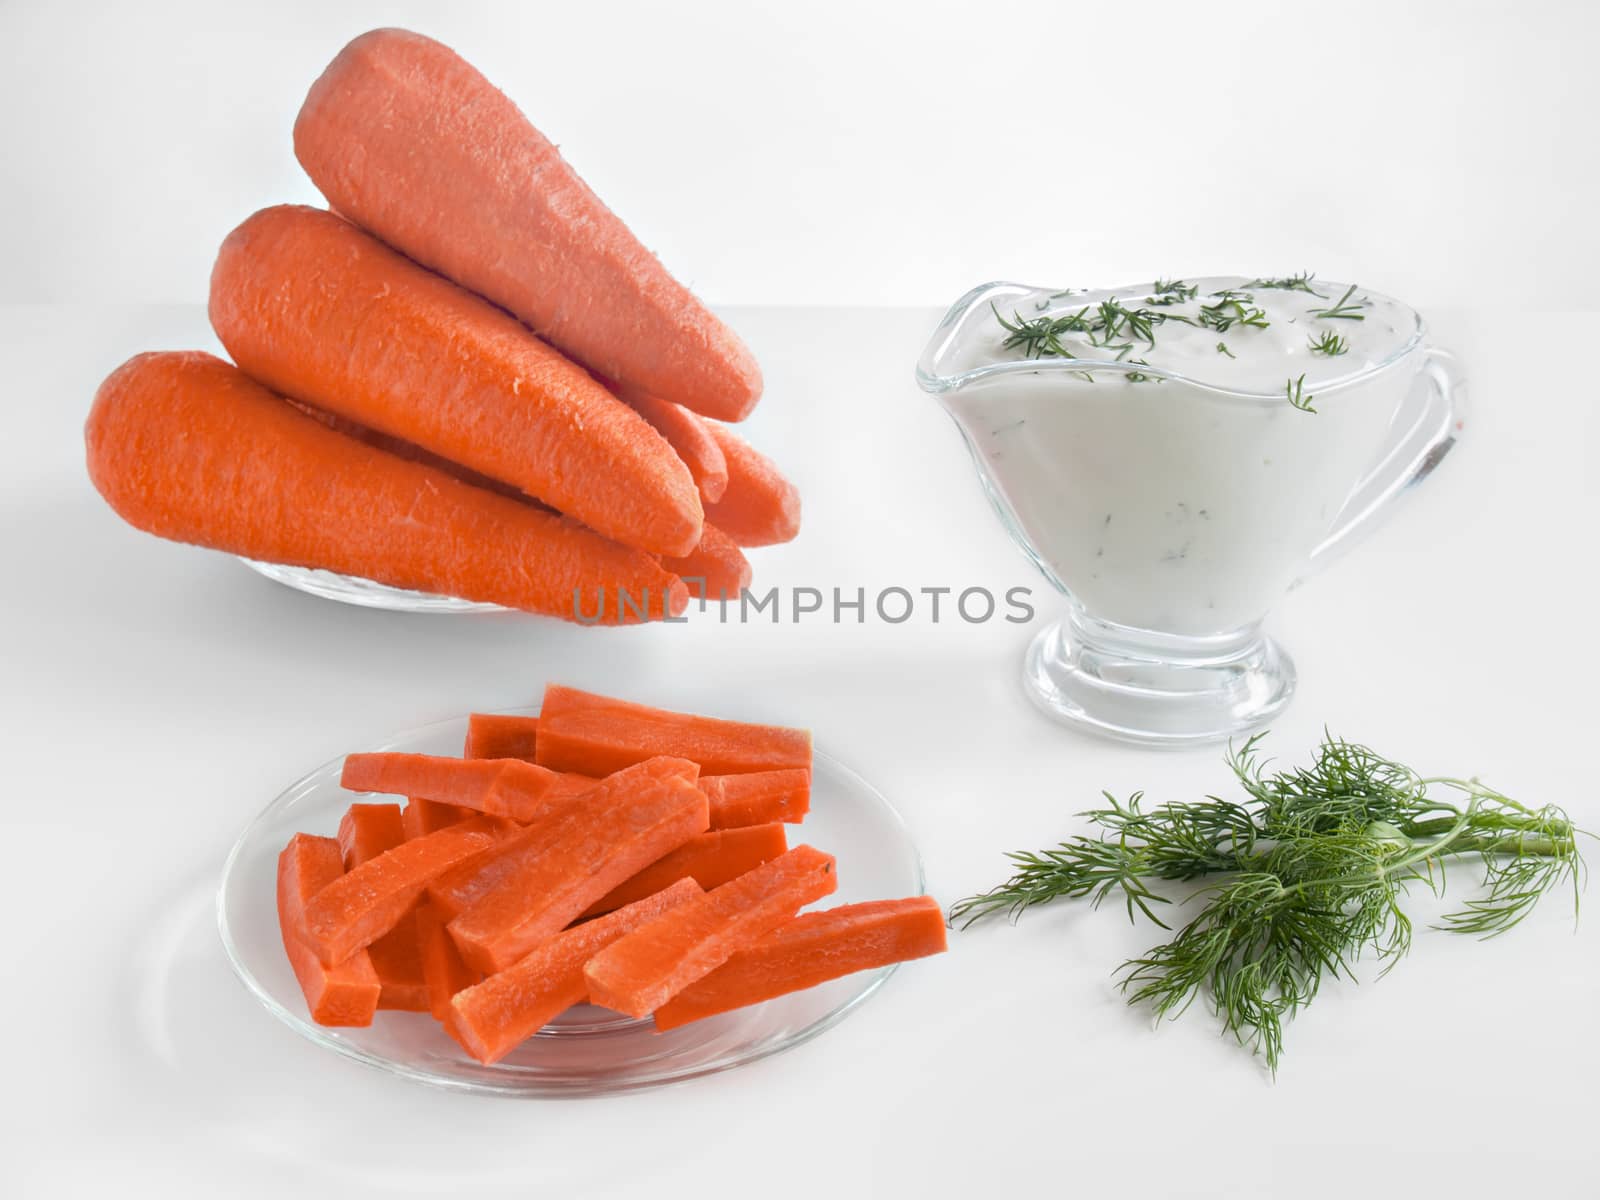 Carrot sticks, whole fresh carrots and sour cream sauce with herbs healthy dietary healthy food on a white background in glass plates and in a glass sauce boat